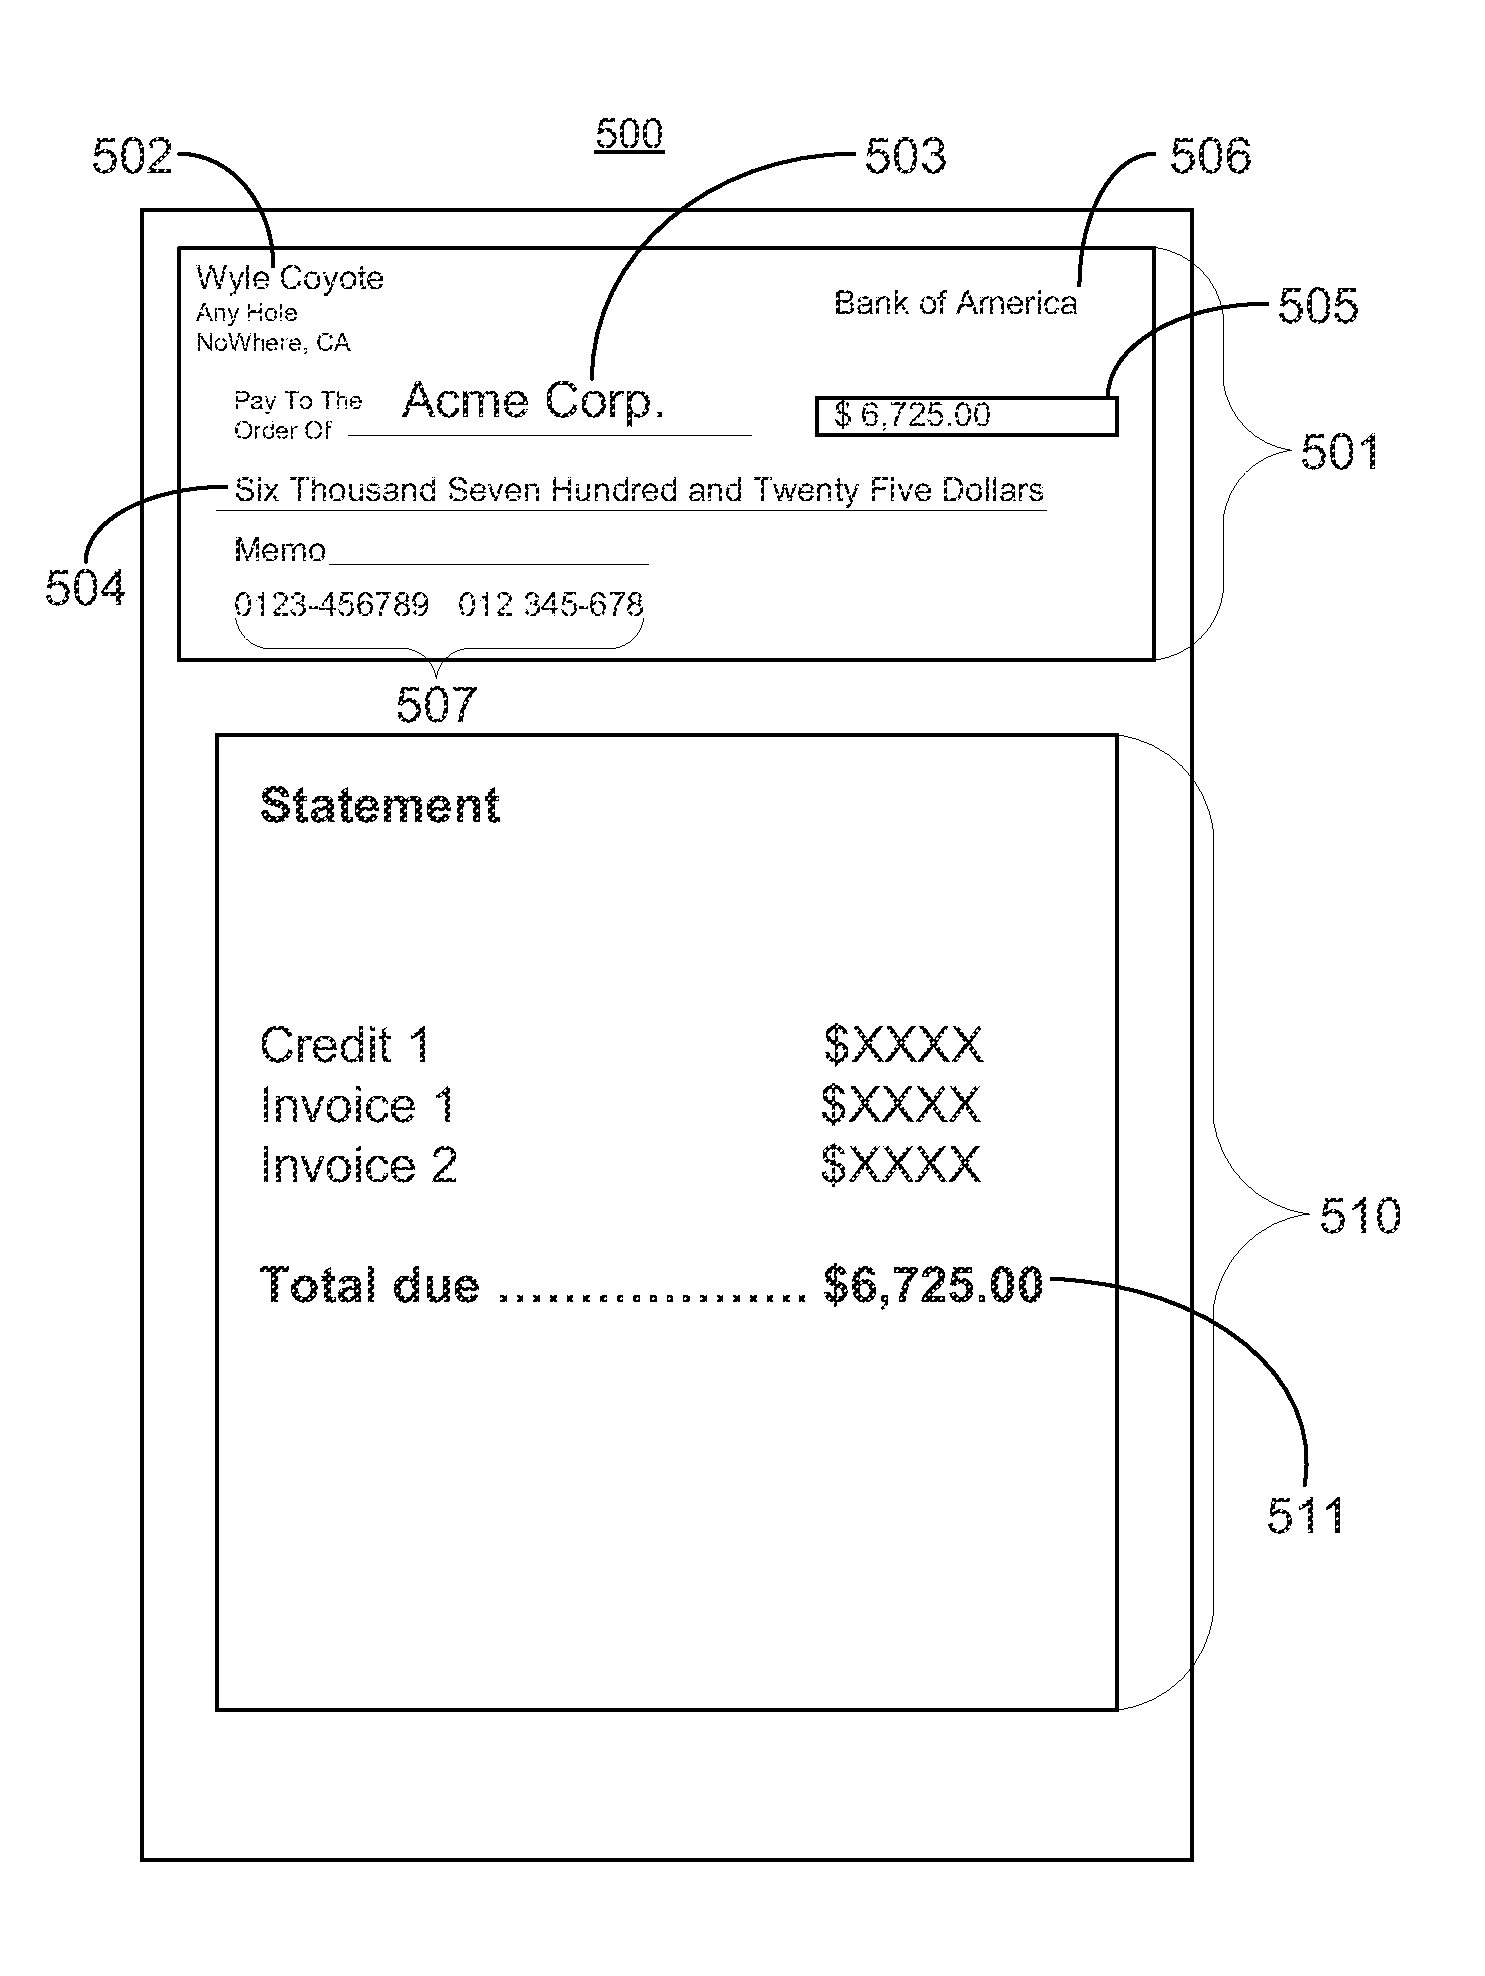 Enhanced invitation process for electronic billing and payment system